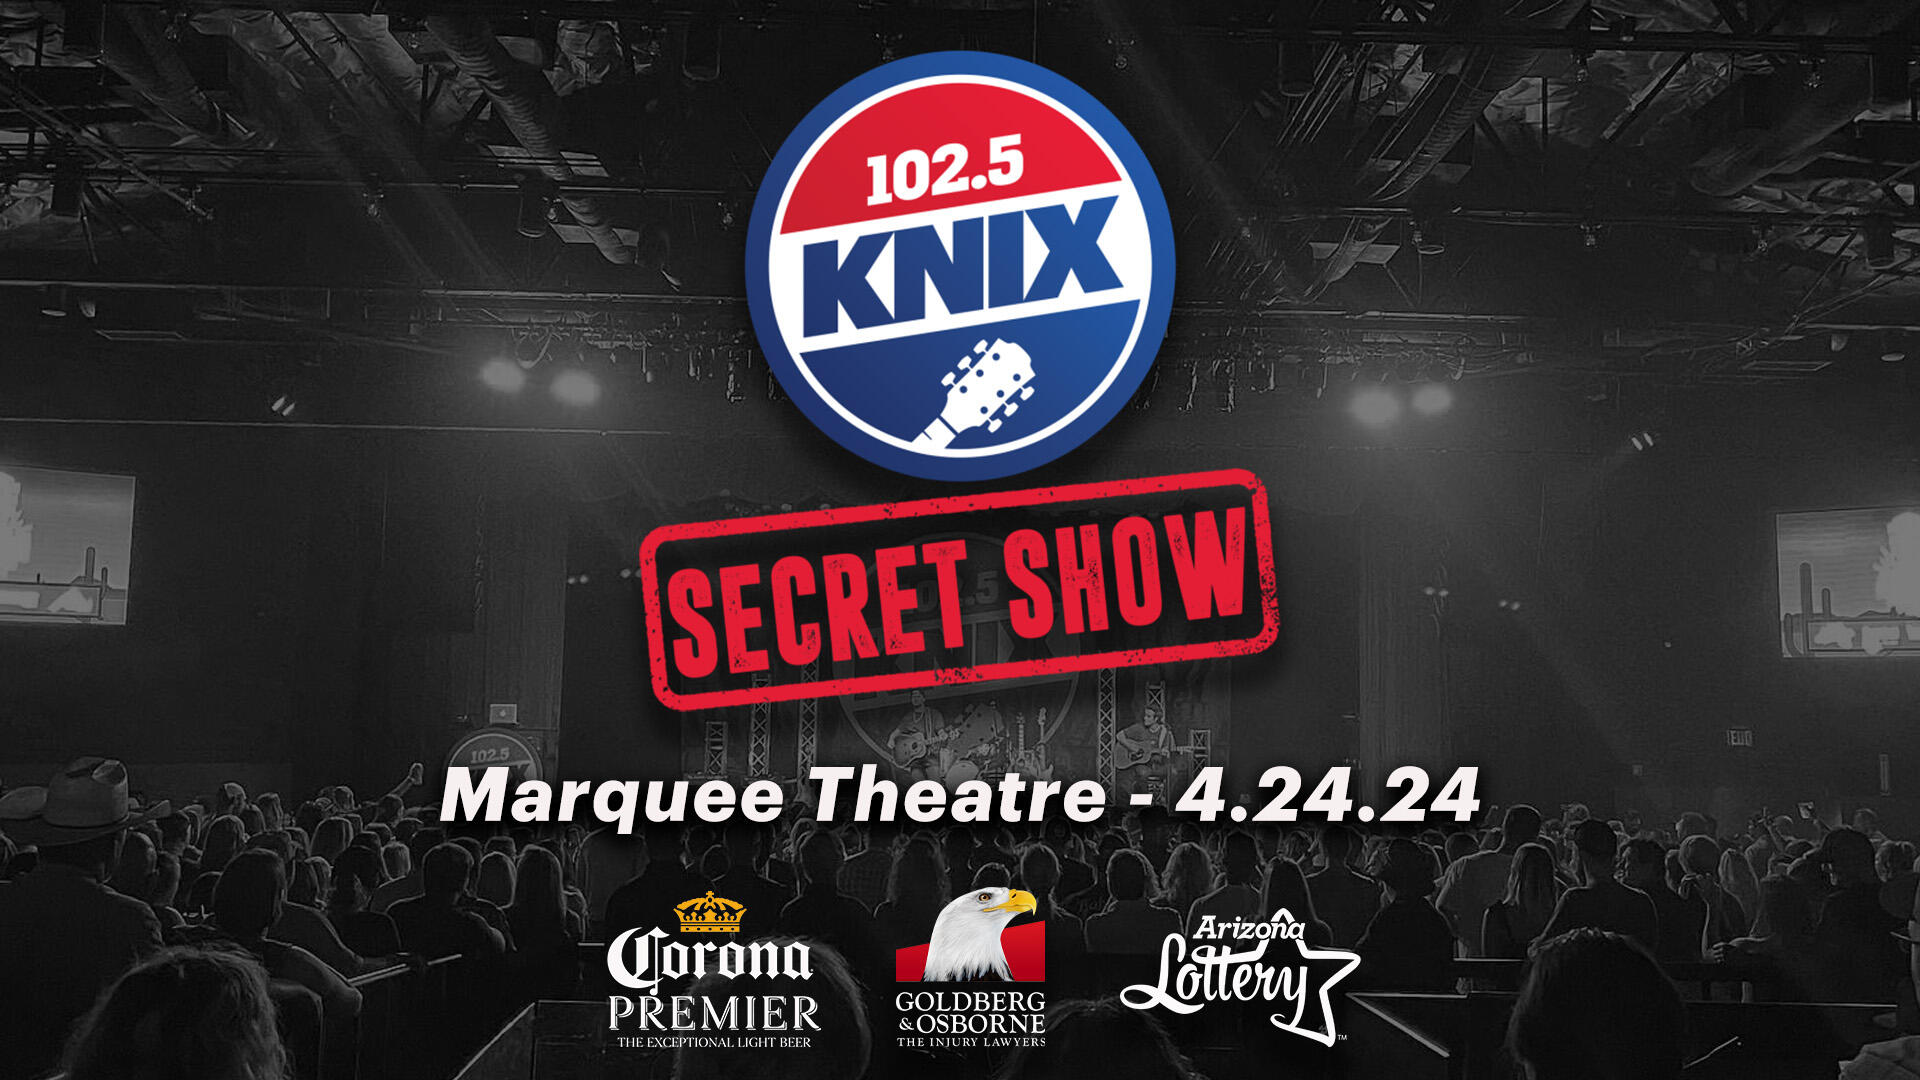 KNIX Country 102.5 - @chrisyoungmusic was KNIX secret show #5 and